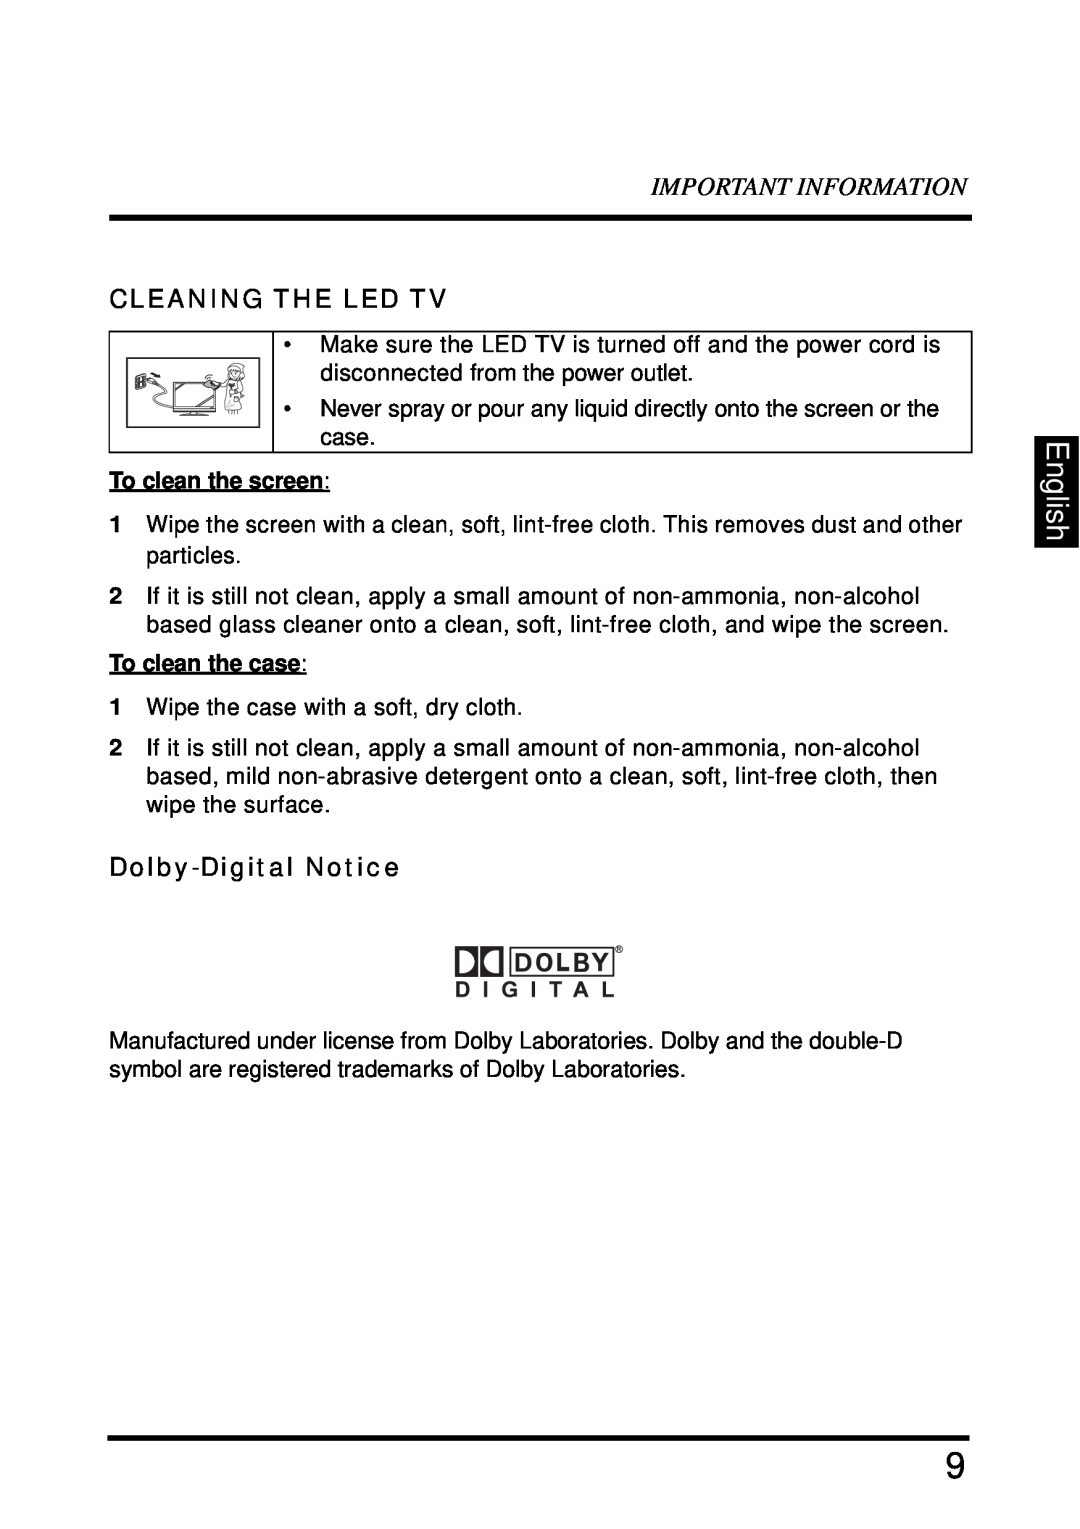 Westinghouse LD-4680 English, Important Information, Cleaning The Led Tv, Dolby-Digital Notice, To clean the screen 